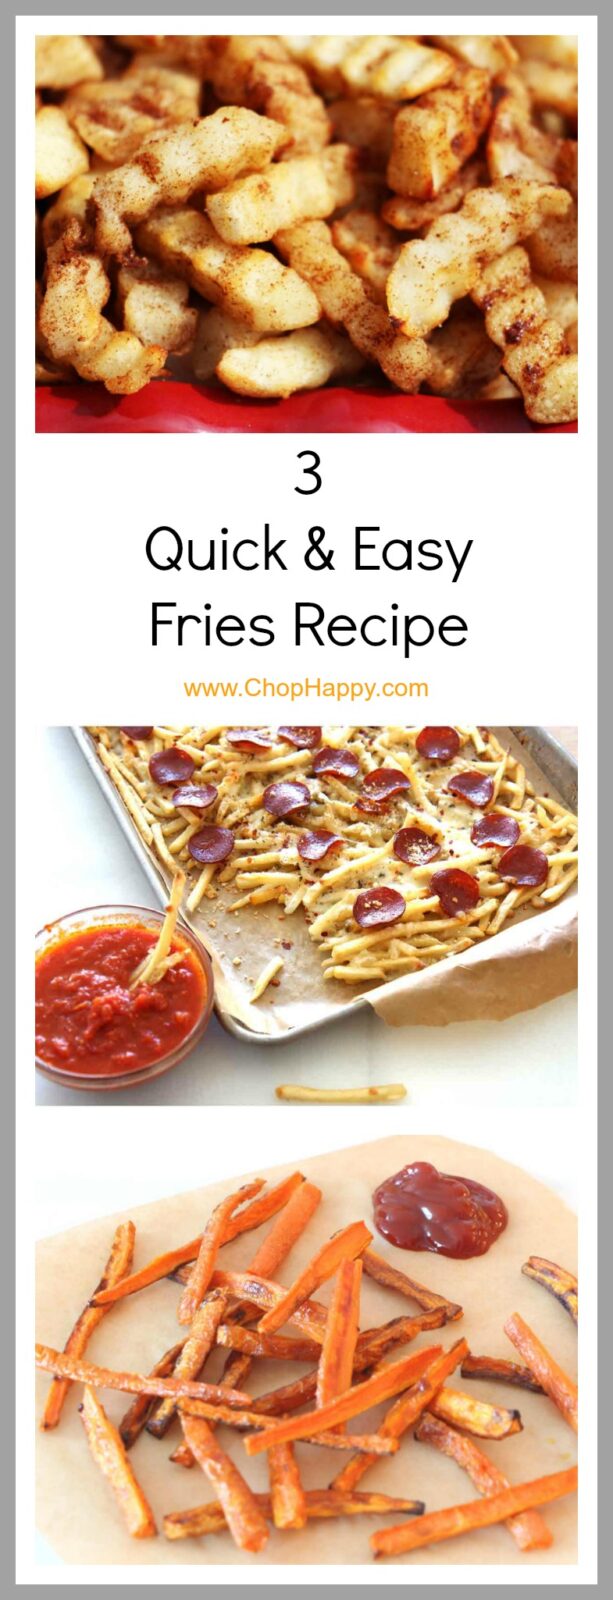 3 Easy and Simple Fries Recipes - that are quick sheet pan dinners. Grab fries and lets get the family to smile as you serve this for dinner or after school snack.  www.ChopHappy.com